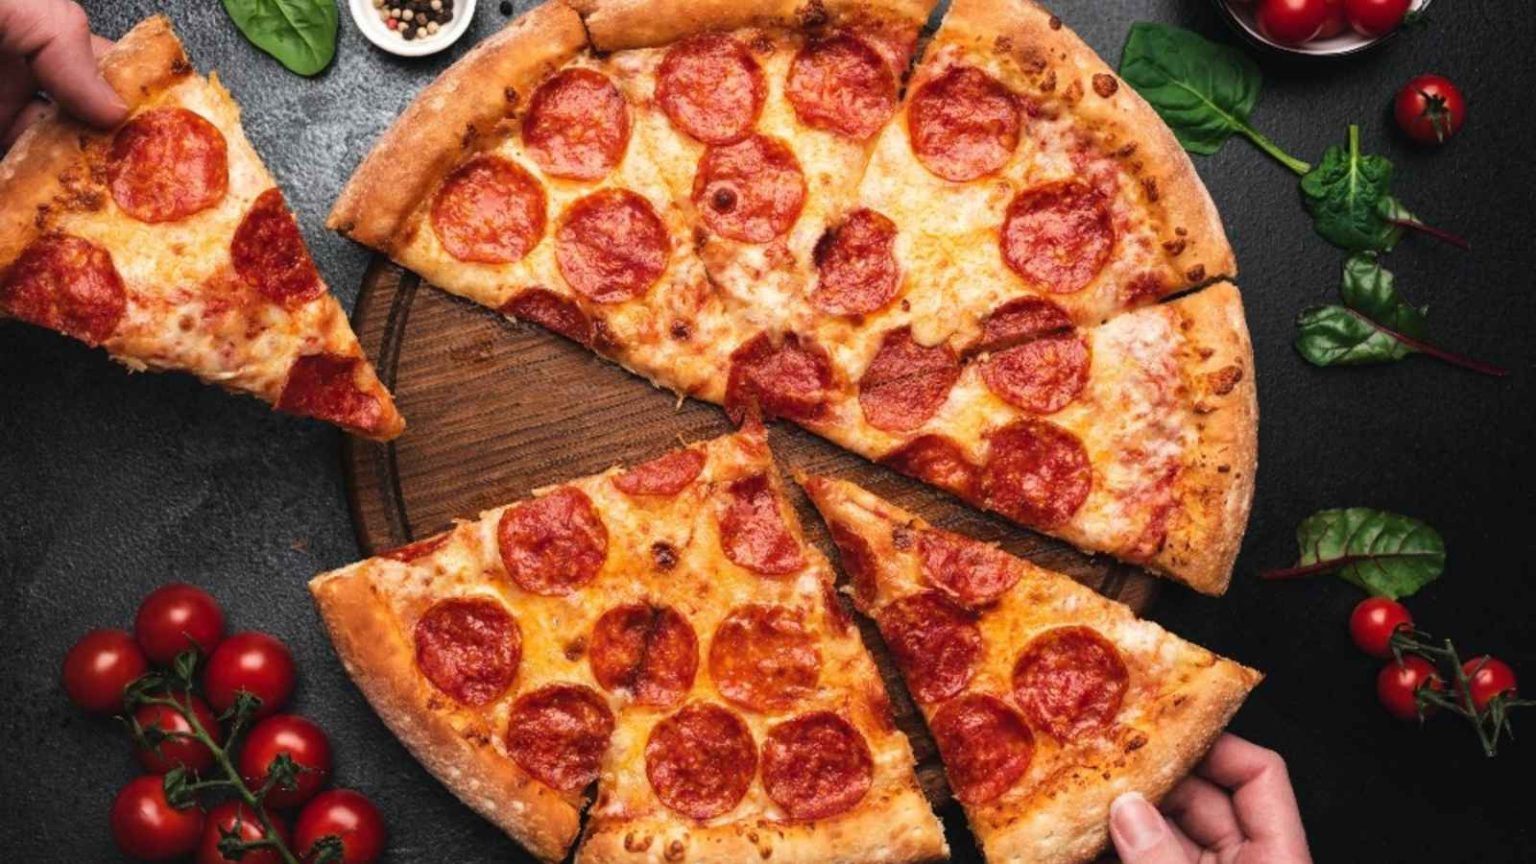 National Pizza Day Free Pizza 2020 Jpg 1 1536x864 